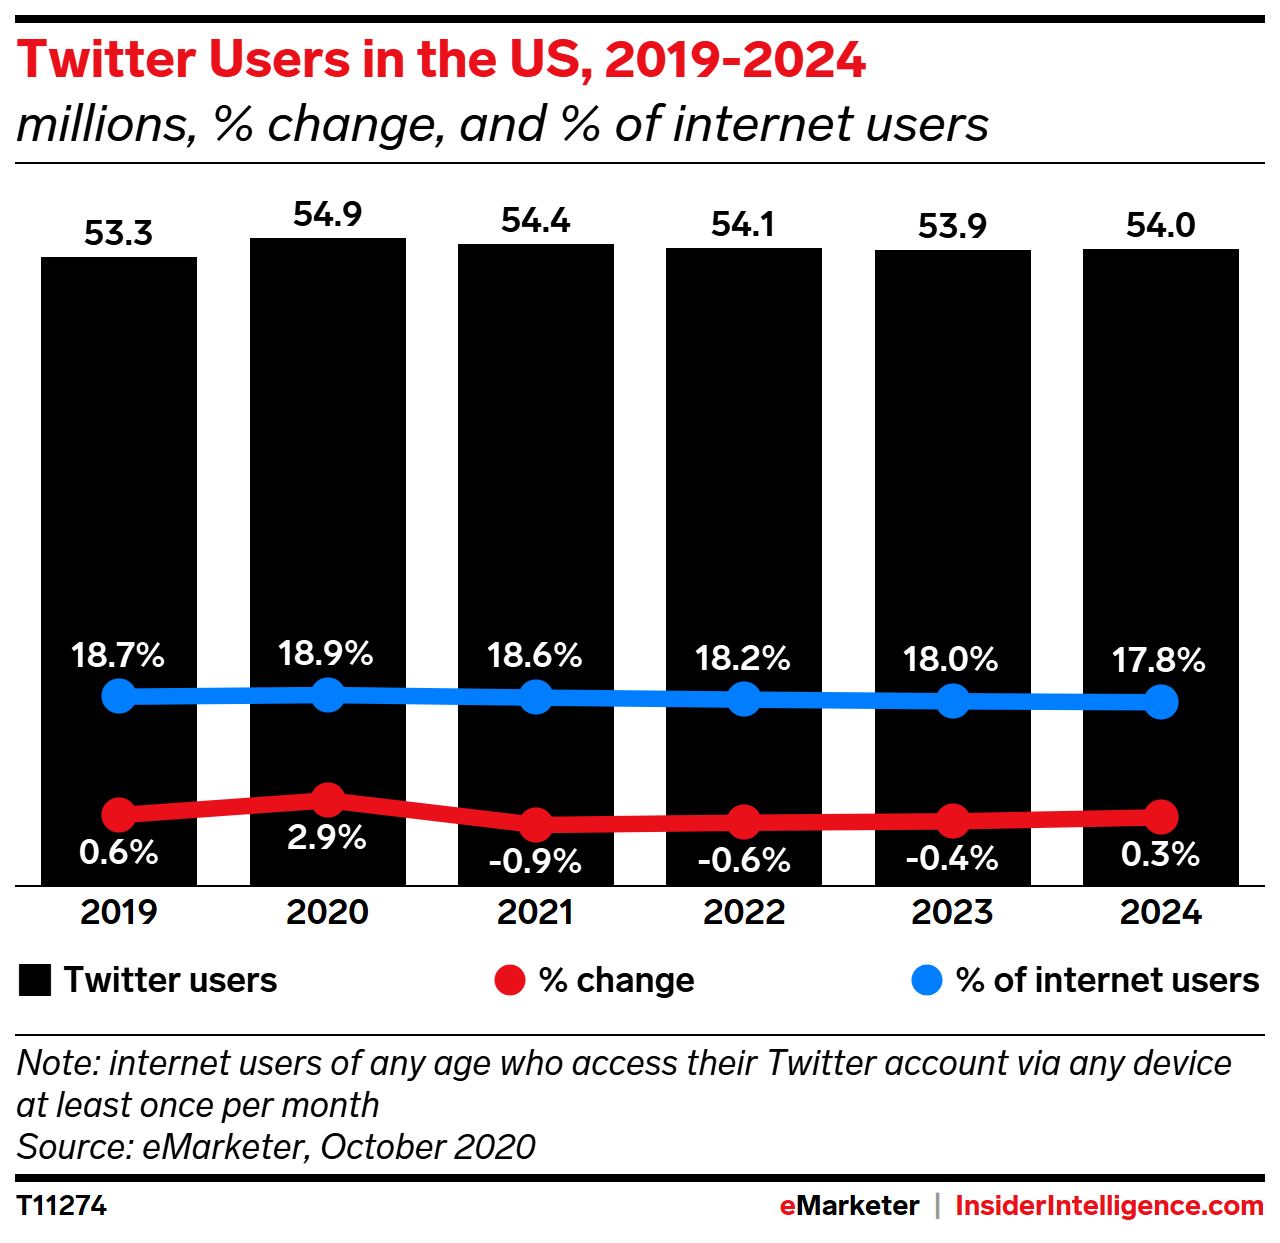 Twitter Users in the US, 2019-2024 (millions, % change, and % of internet users)